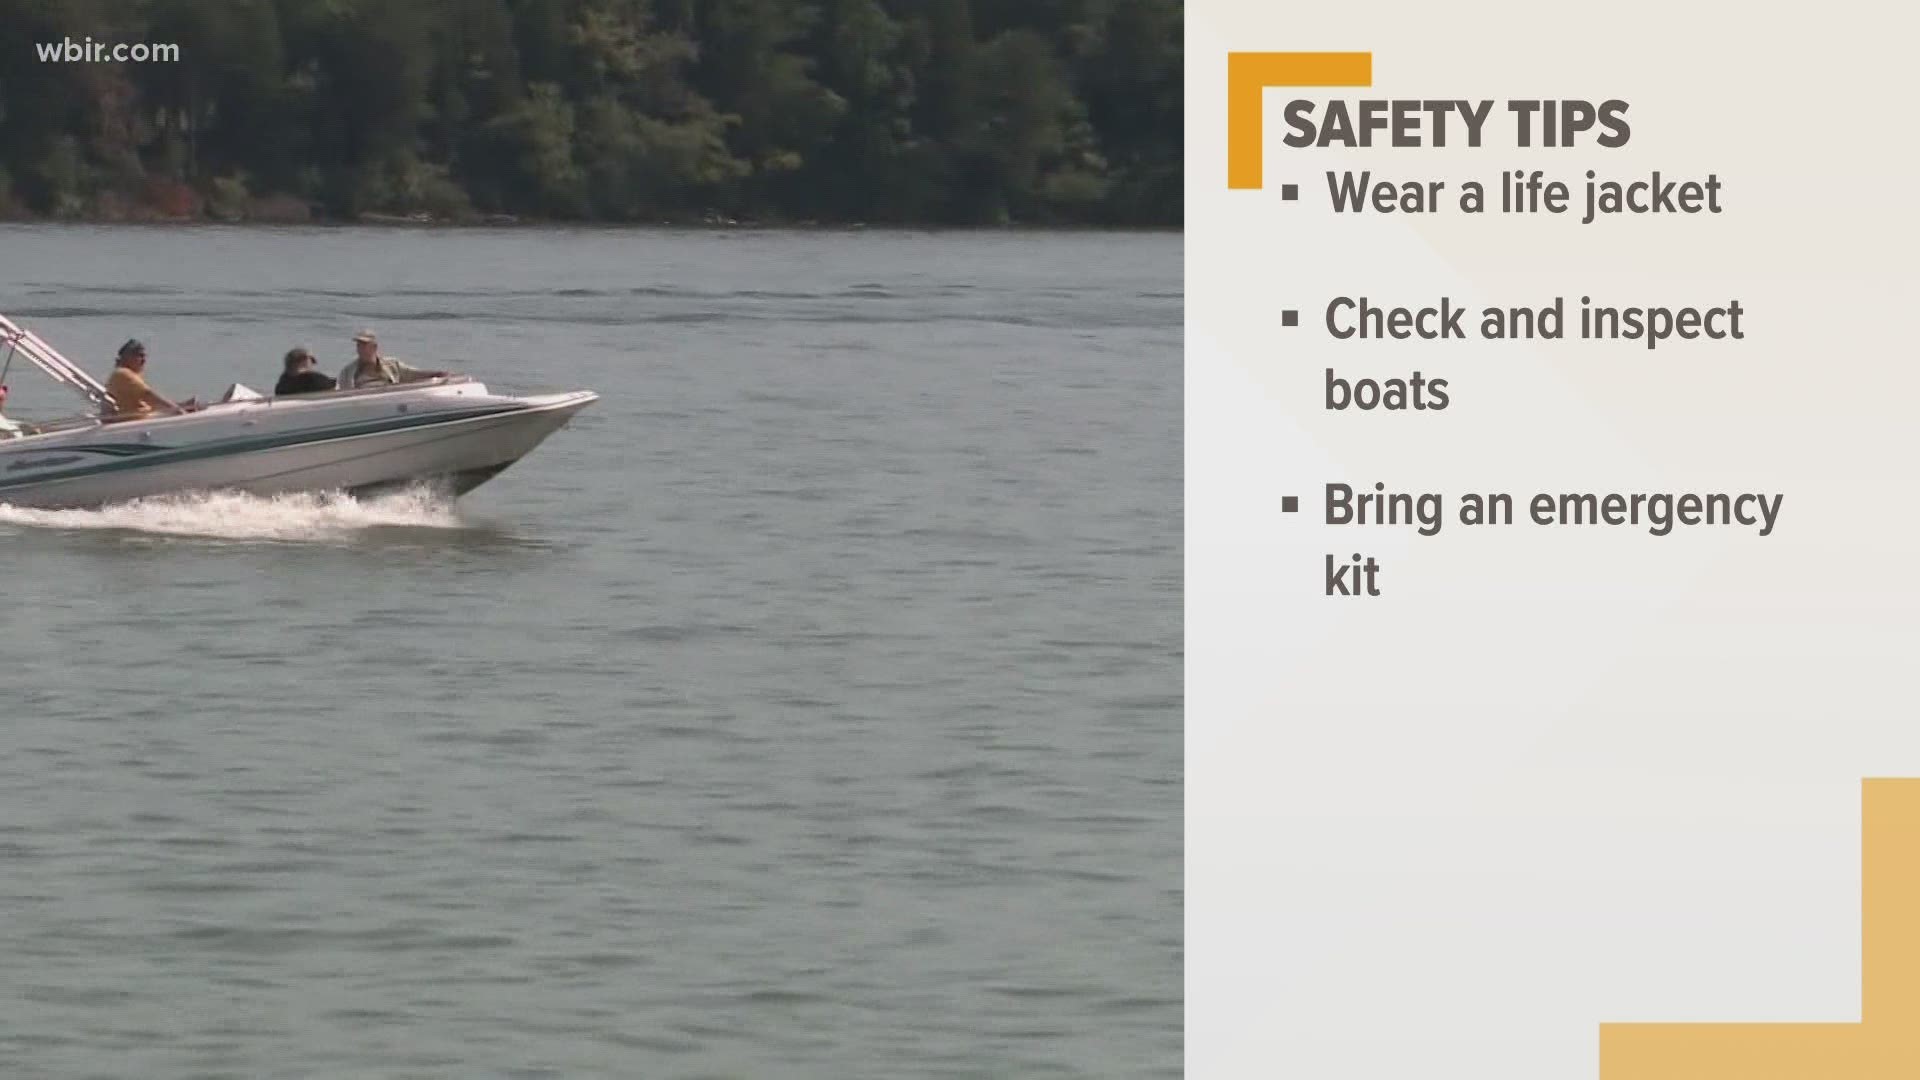 The Tennessee Wildlife Resources Agency said that seven boating fatalities have been reported so far this year in the state.